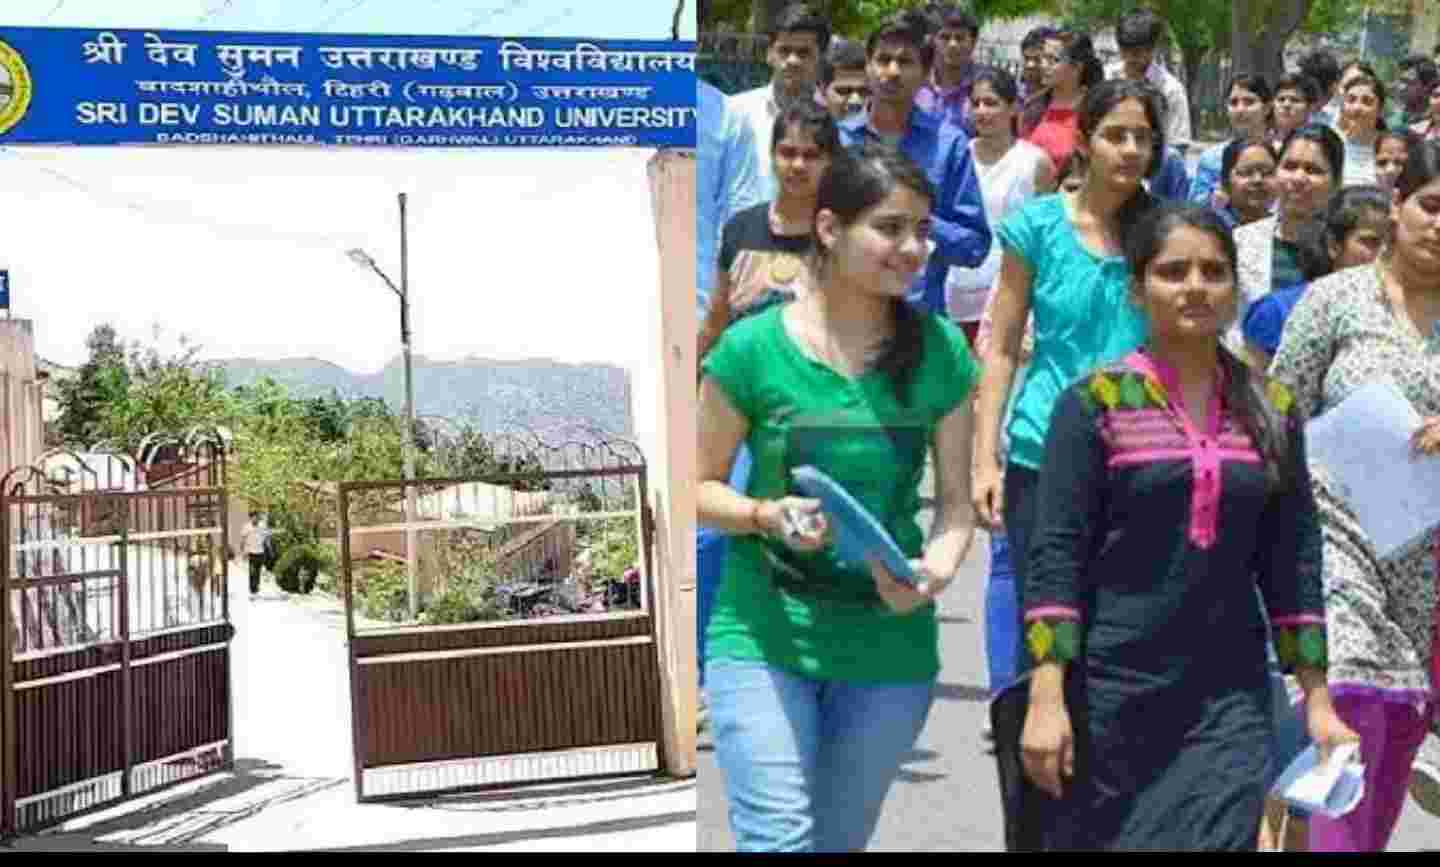 Uttarakhand news:Sri Dev Suman B.Ed Entrance Result declared,new admissions will be done in July